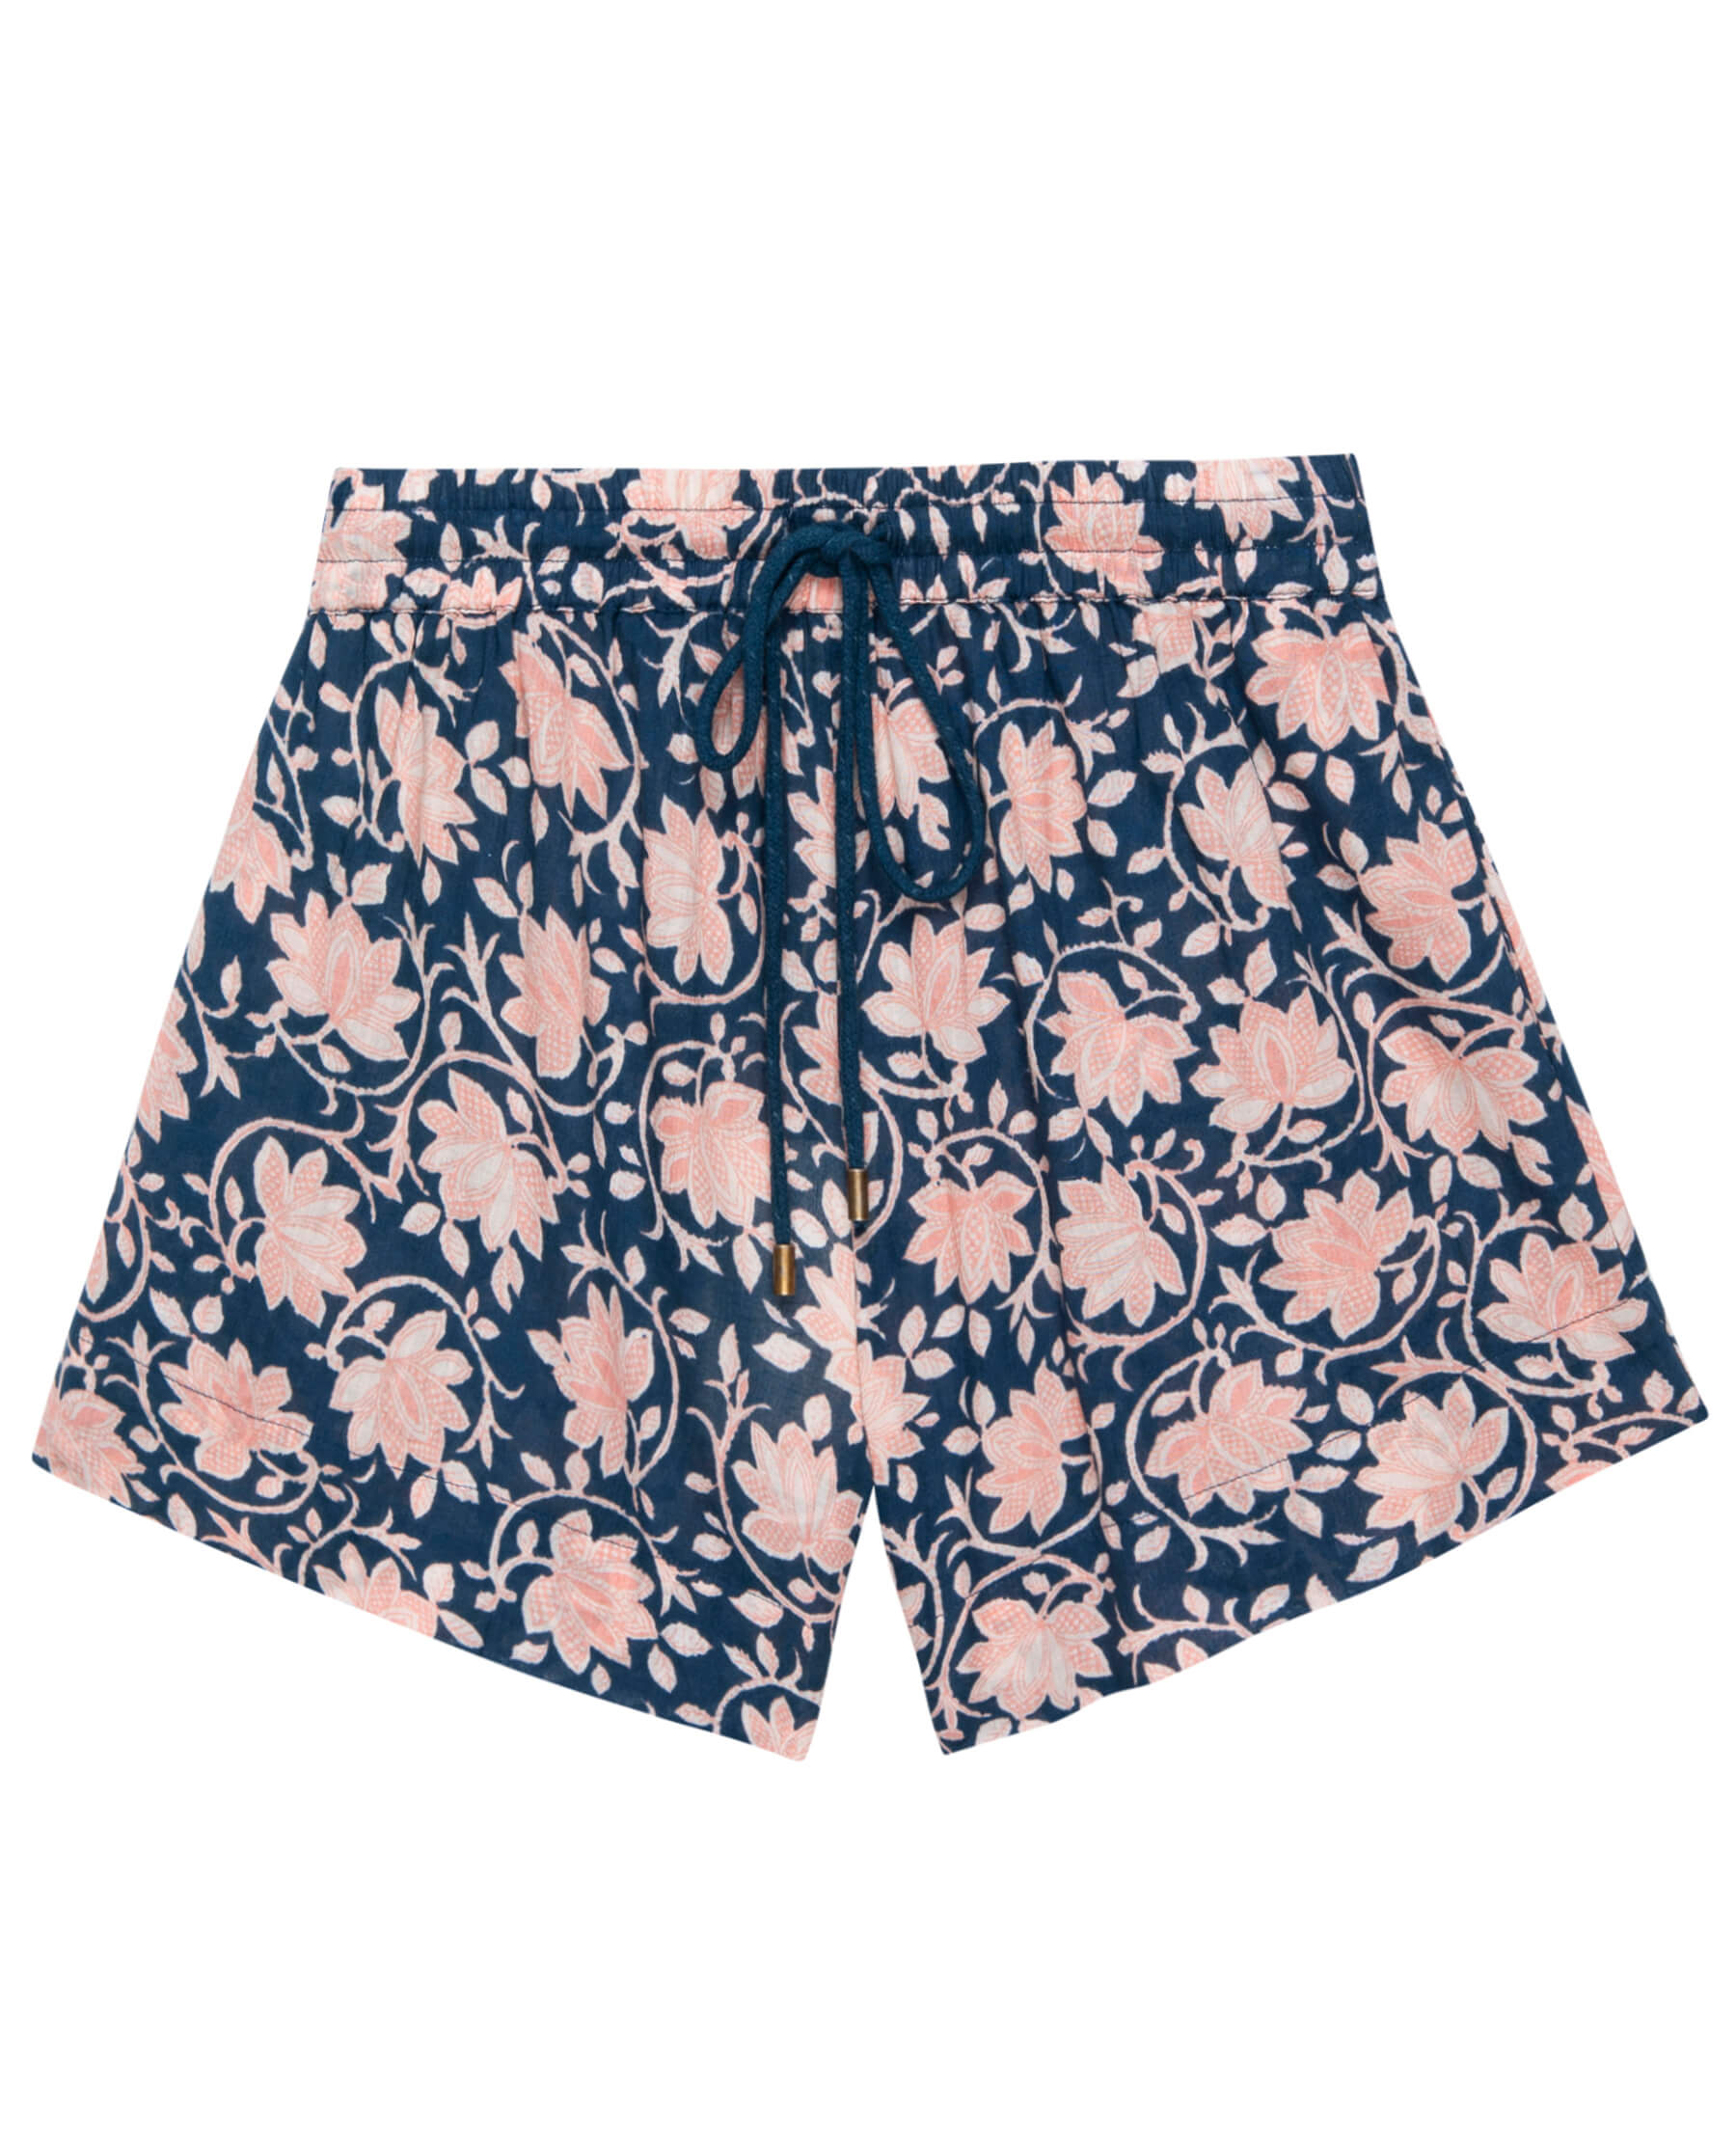 The Delta Short. -- Bay Oasis Floral COVER-UP SHORTS THE GREAT. SP24 SWIM